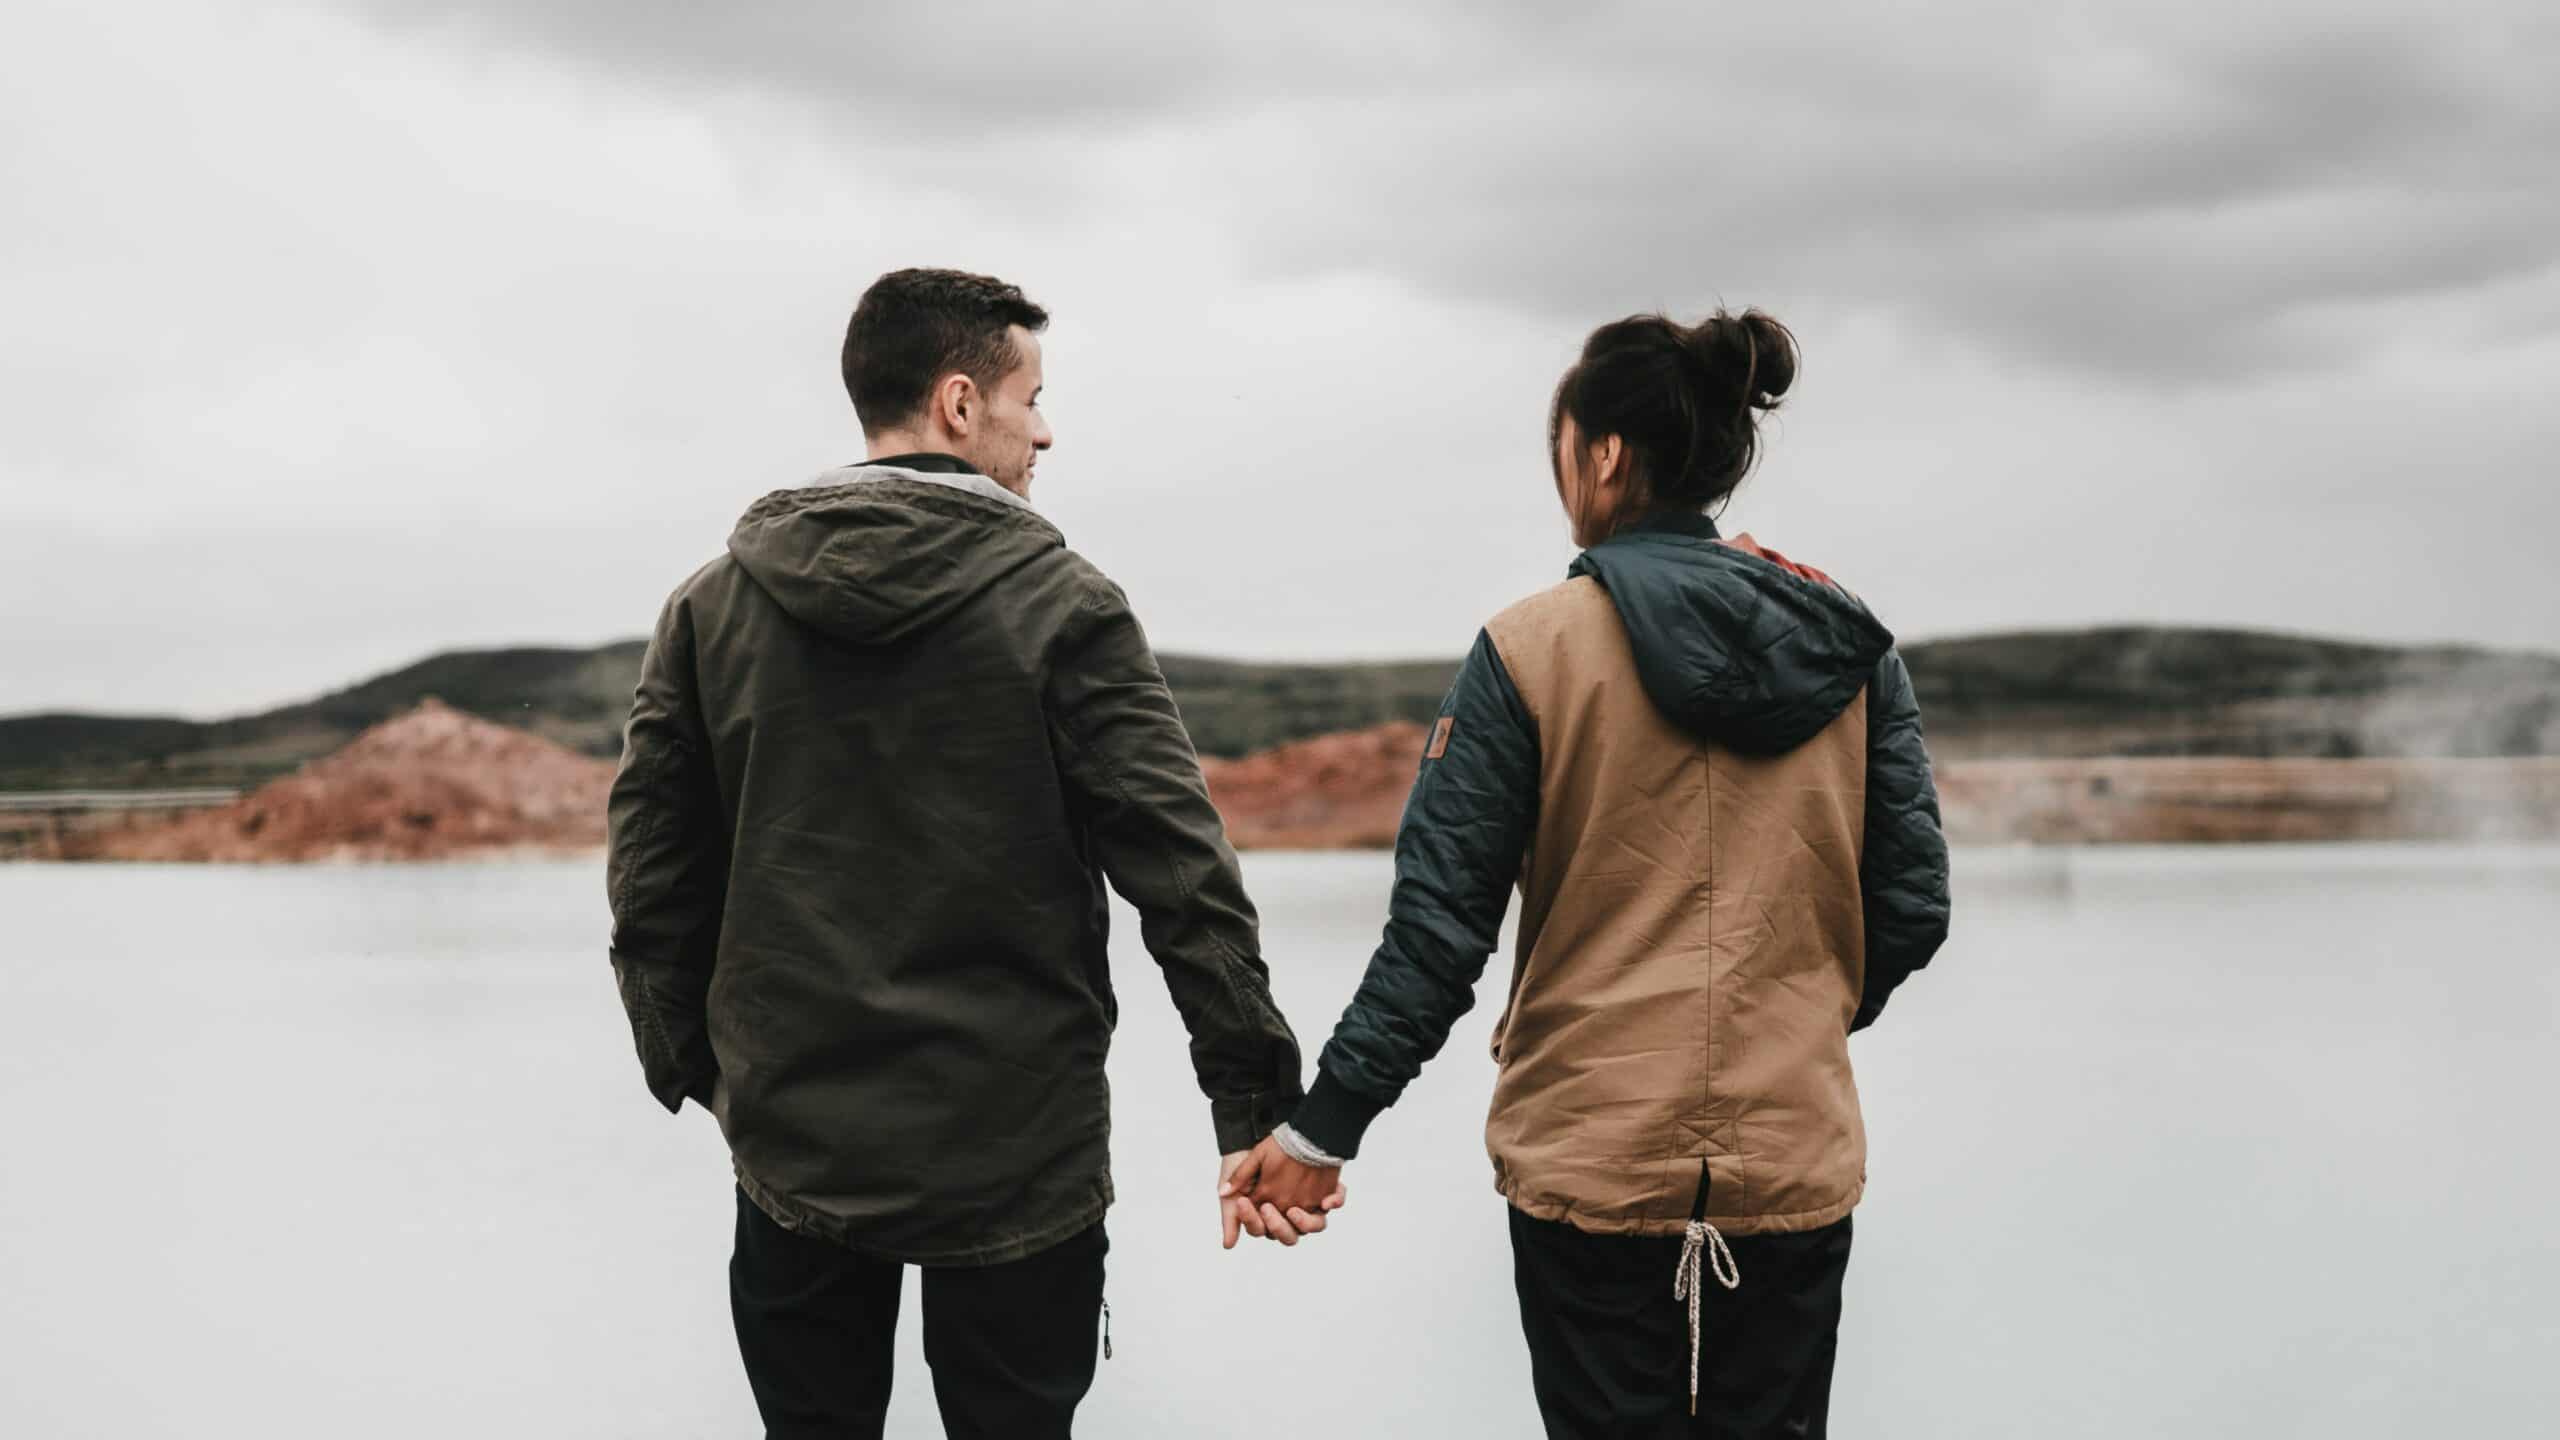 Why You're Feeling Lonely in a Relationship and What to Do